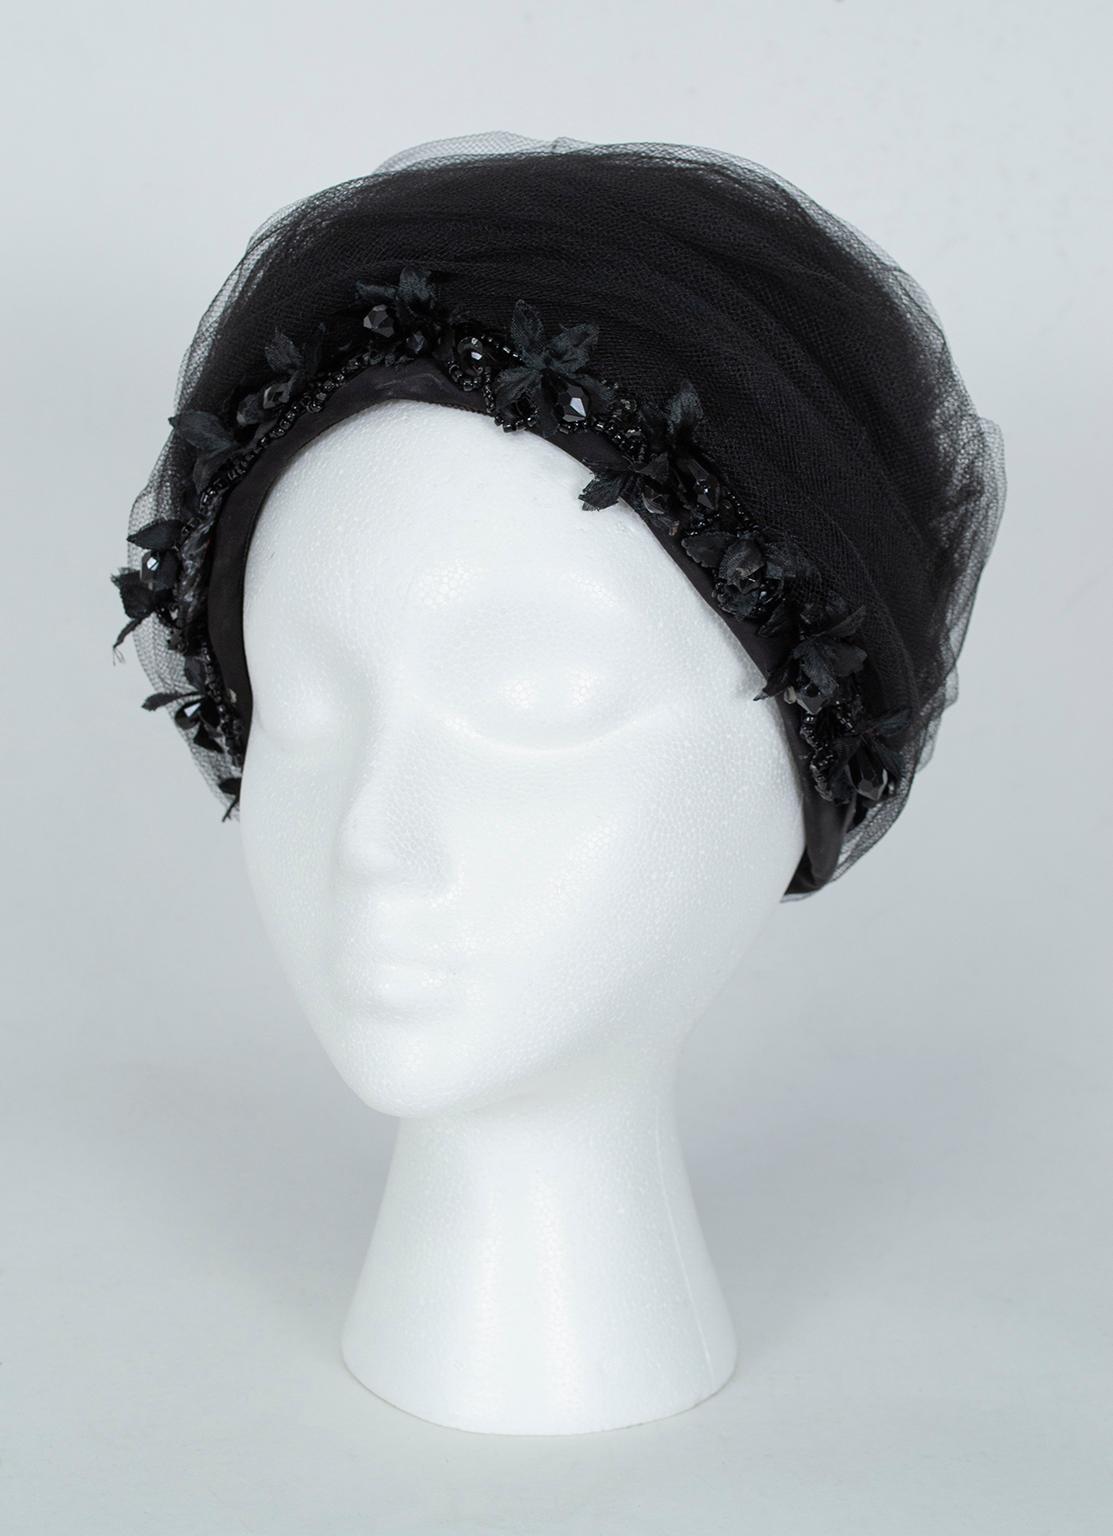 Not for the faint of heart, this frothy cocktail hat will add inches to your height and ensure you leave a memorable impression. Dangling faceted beads around the bottom edge add subtle sparkle and frame the face, while yards of tulle create a